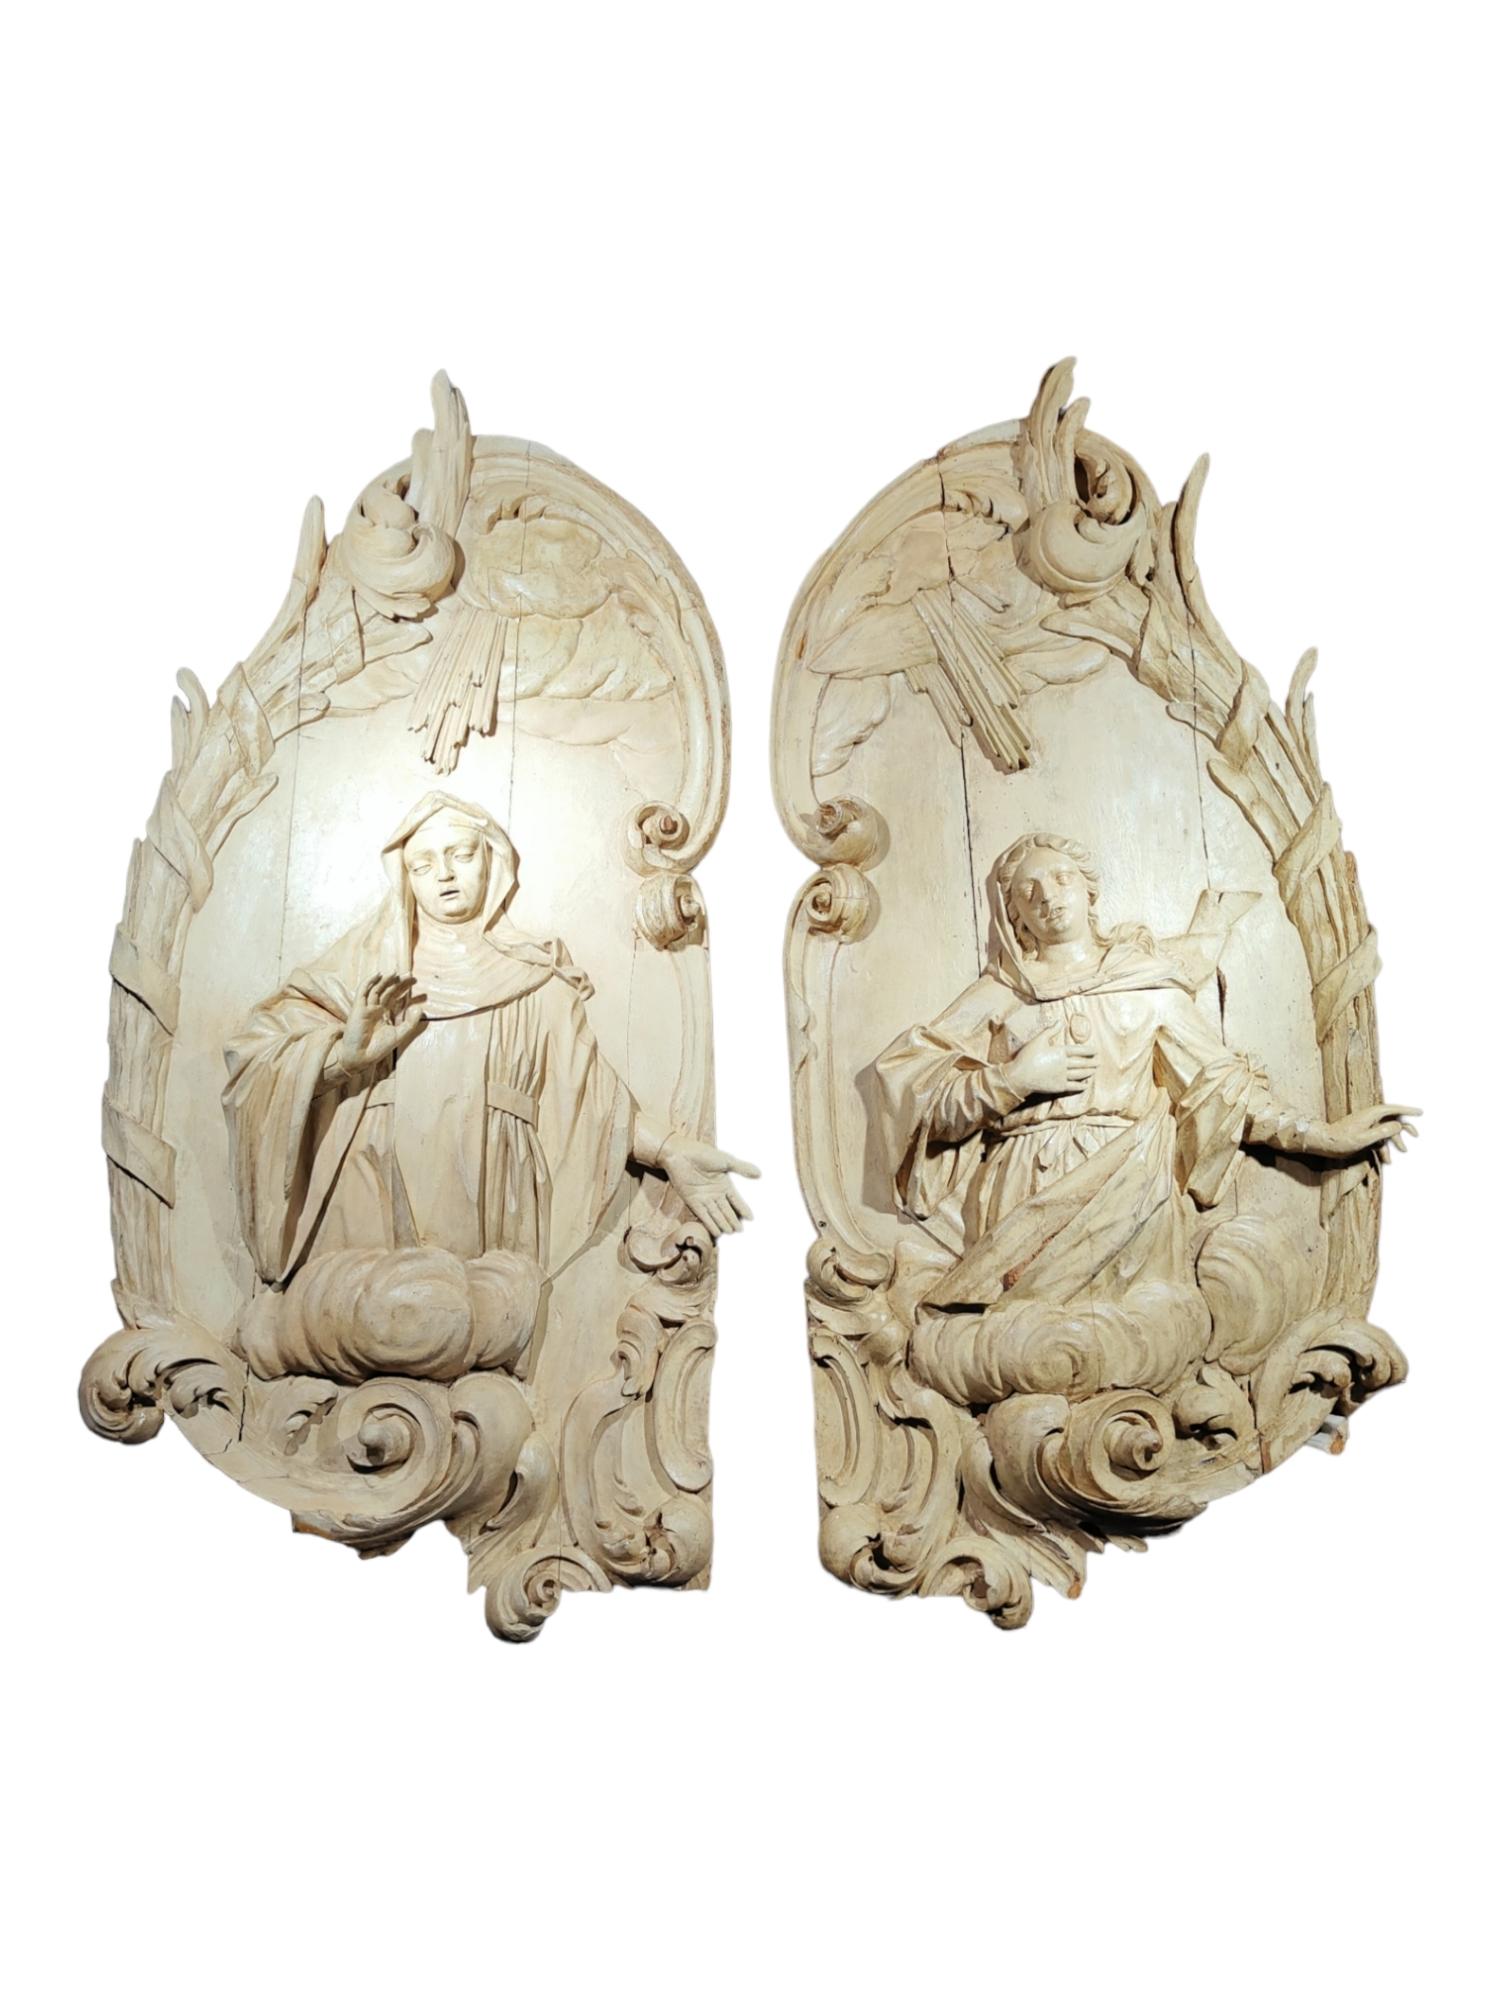 Pair of Monumental Sculpted Panels from the Eighteenth Century For Sale 1